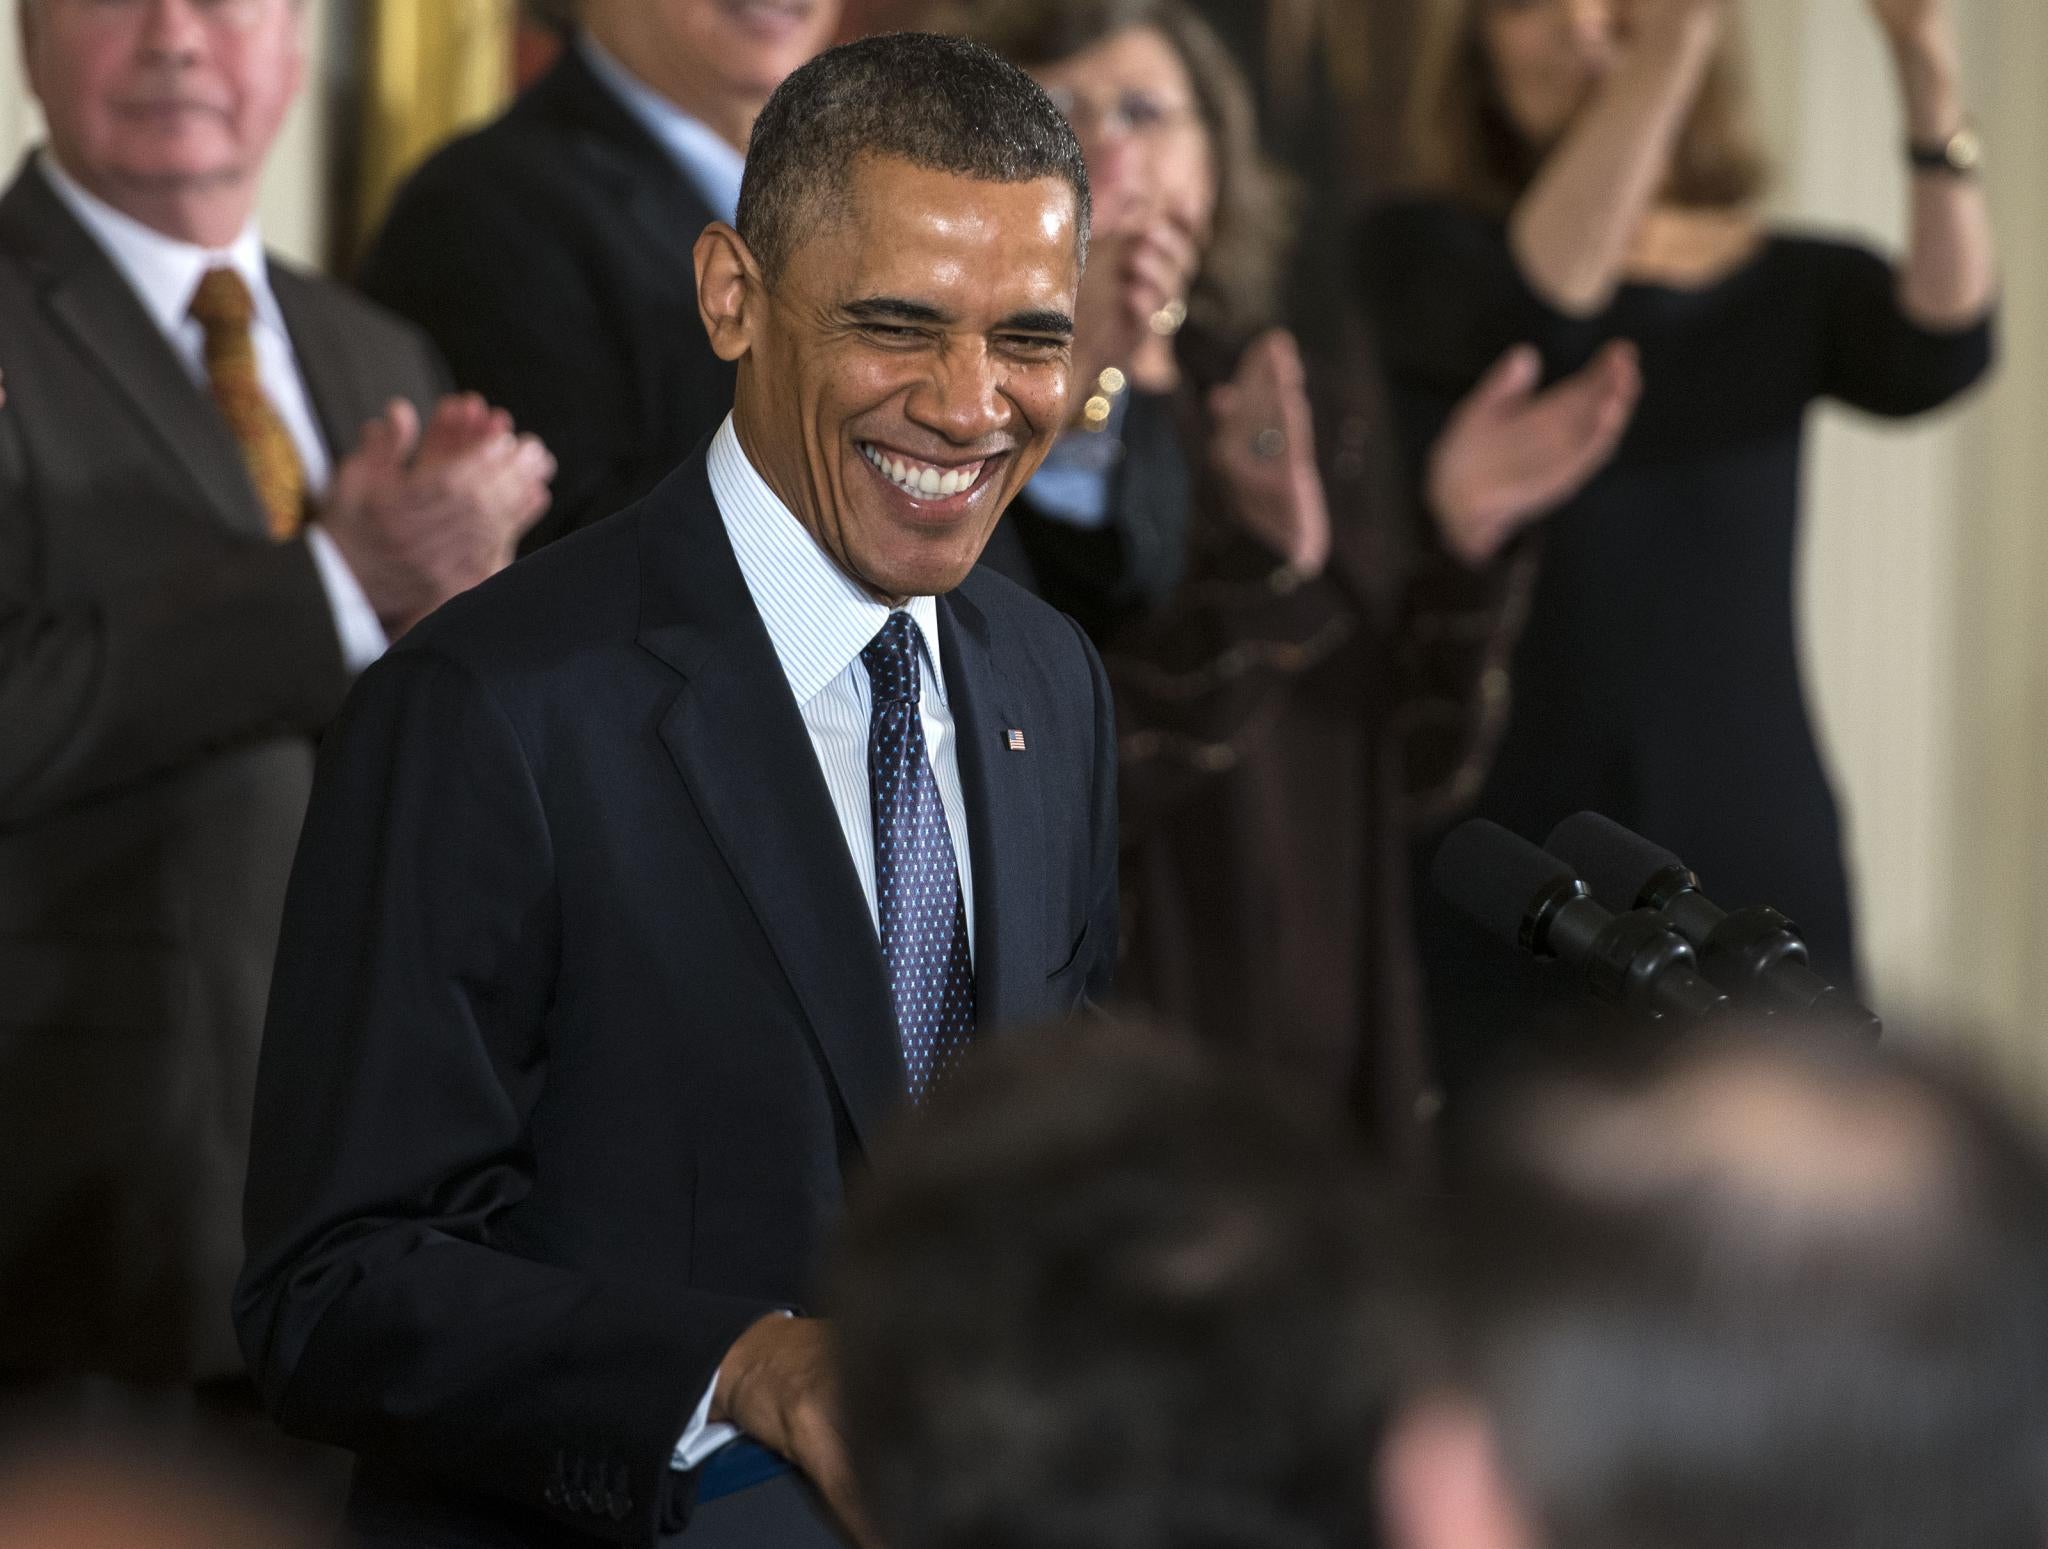 What Are President Obama’s Plans Post White House?